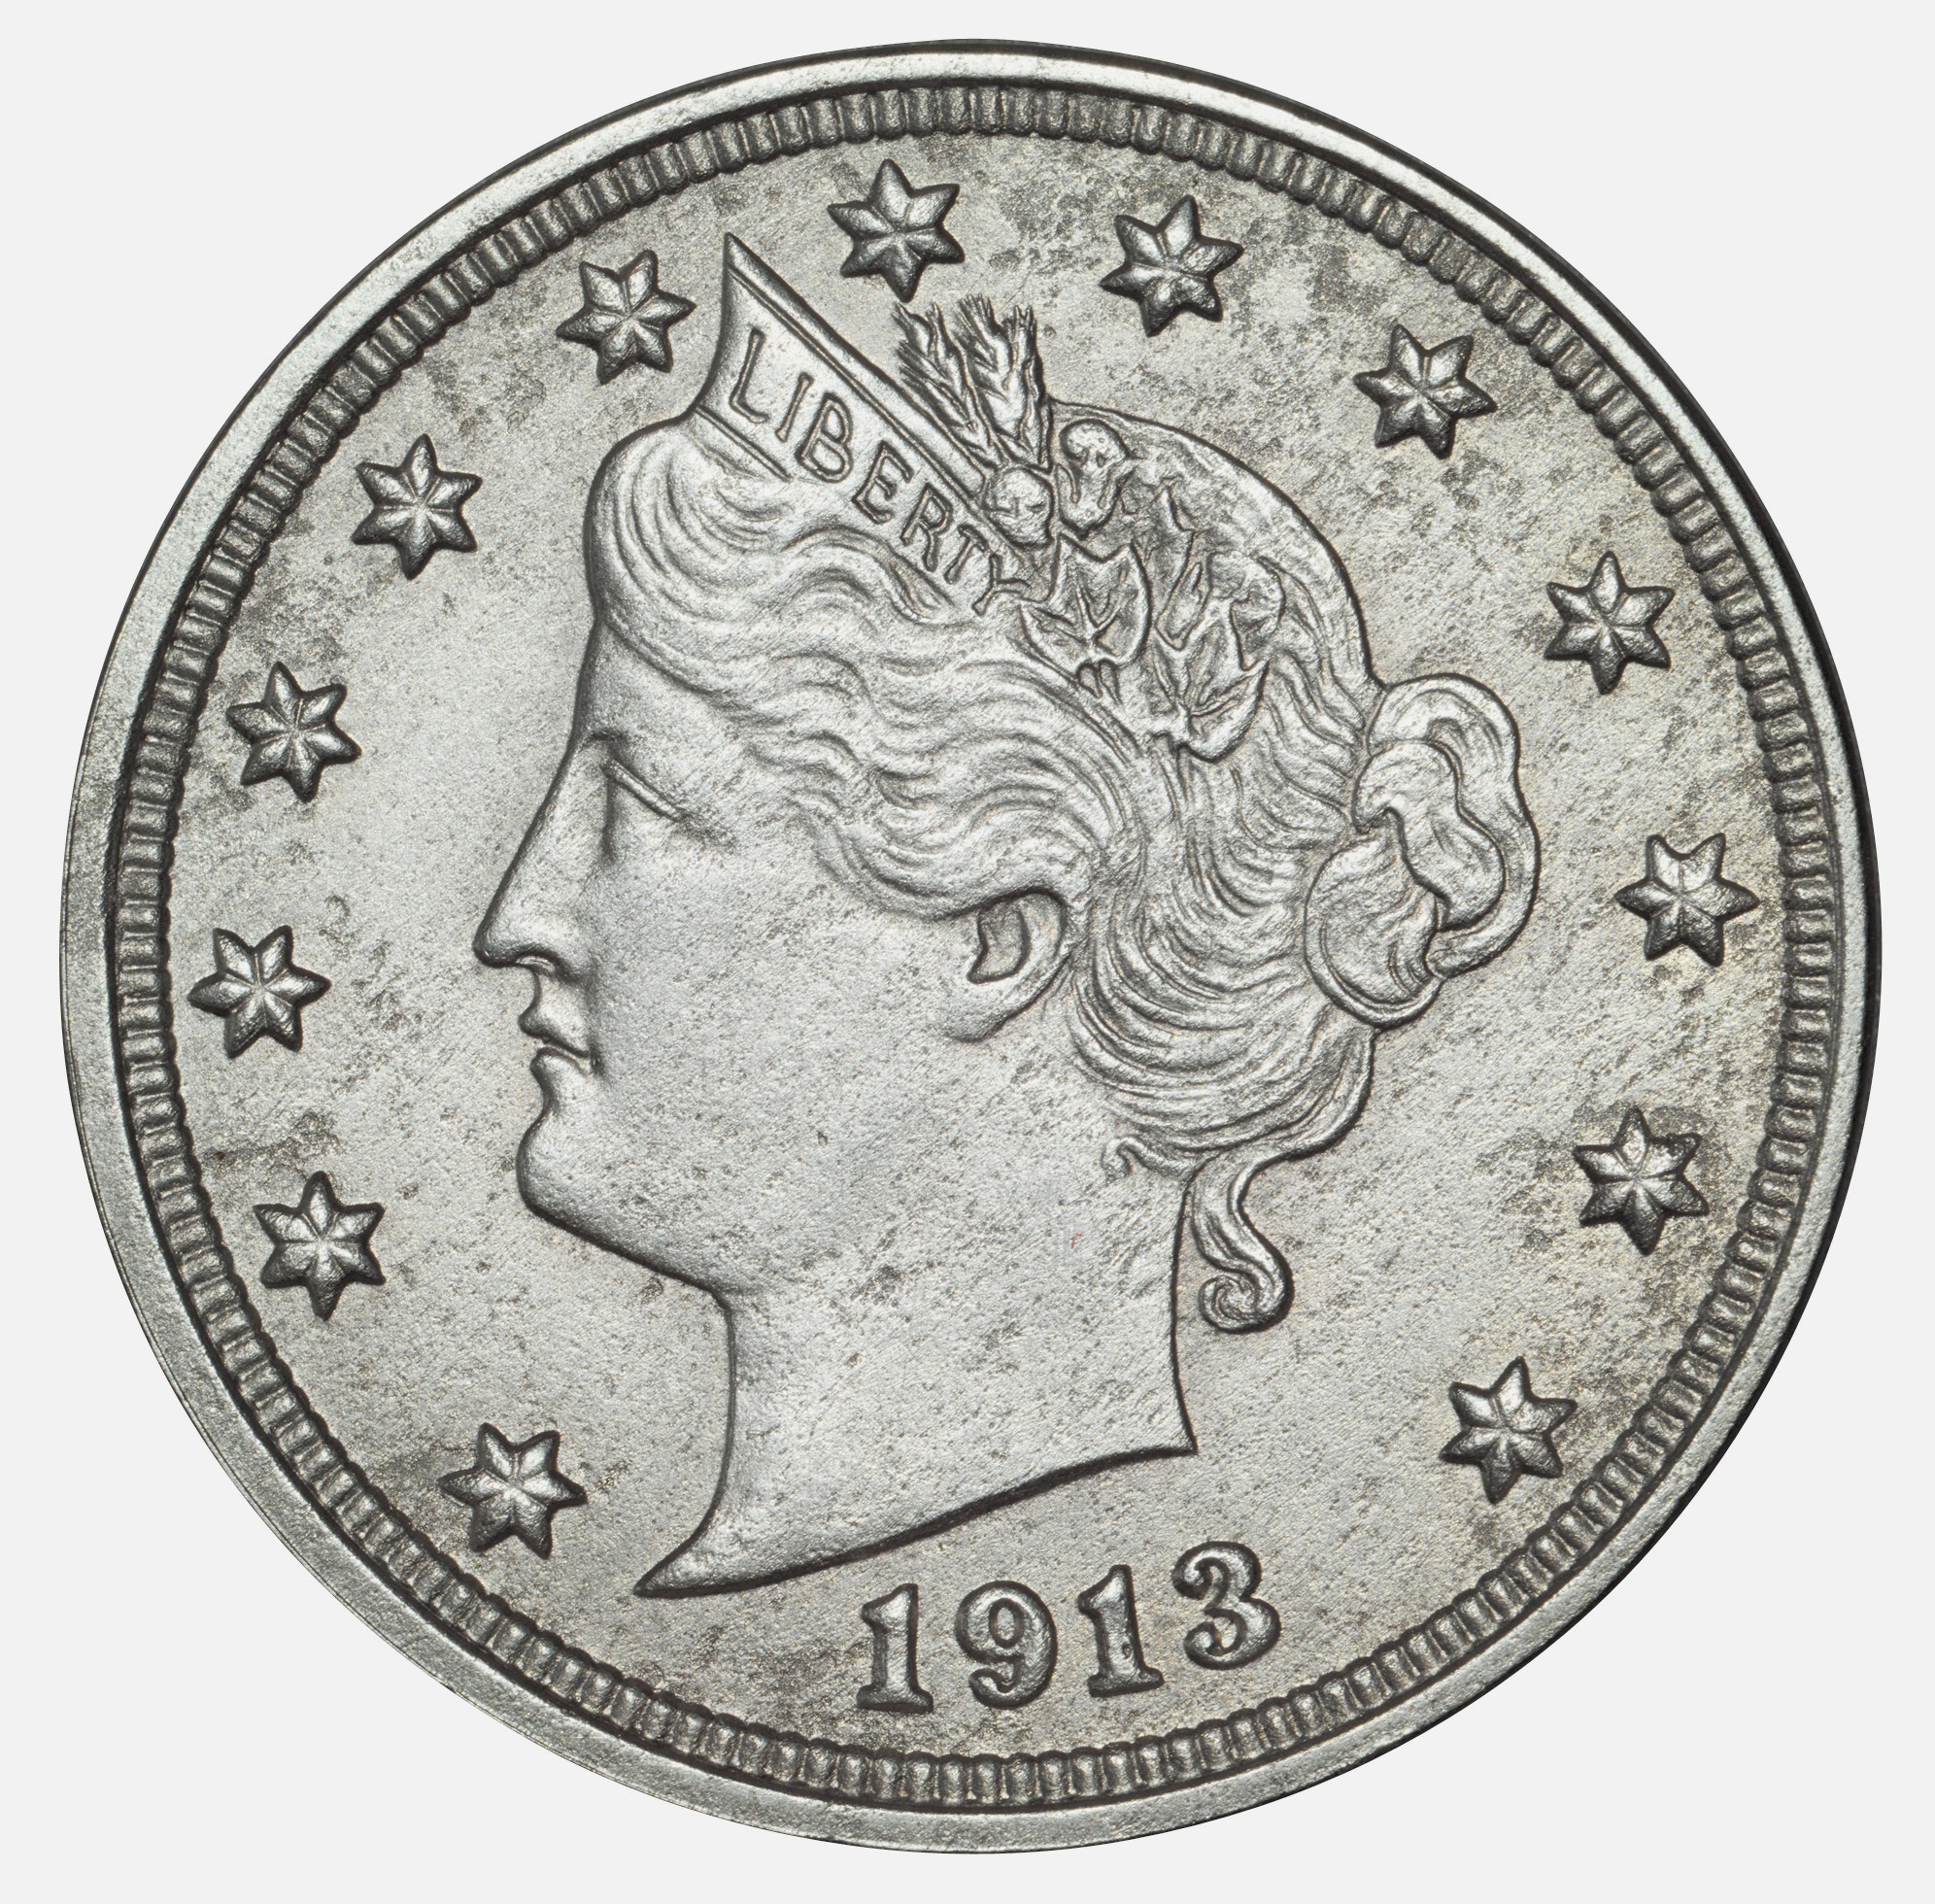 Only five 1913-dated U.S. Liberty Head nickels are known. See one these historic coins, valued at $3 million, on display at the family-friendly World’s Fair of Money® in the Anaheim Convention Center.